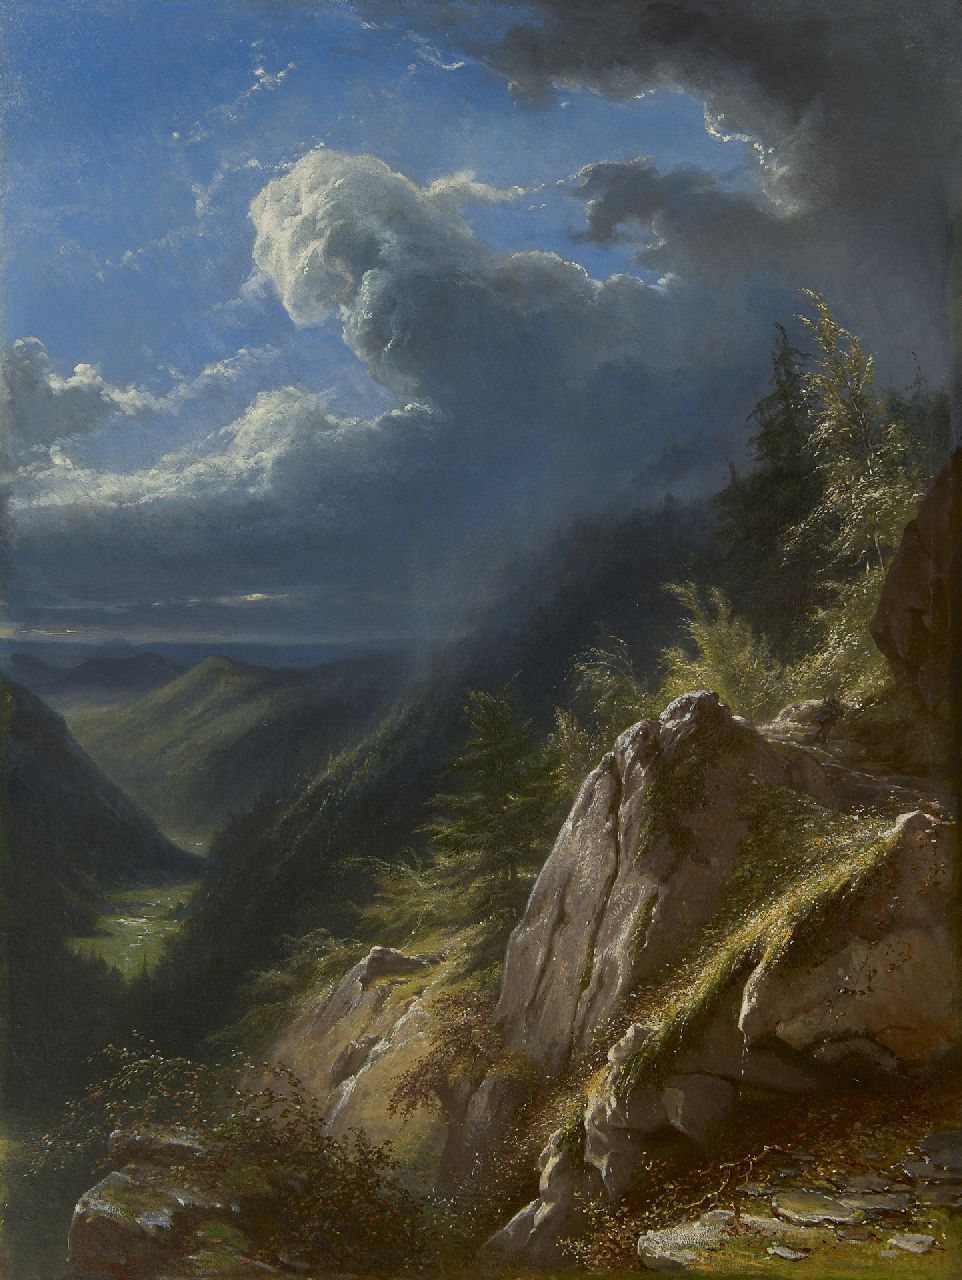 Lamme A.J.  | Ary Johannes Lamme, Upcoming storm in a mountain landscape, oil on canvas 85.5 x 64.7 cm, signed l.l. and dated 1873